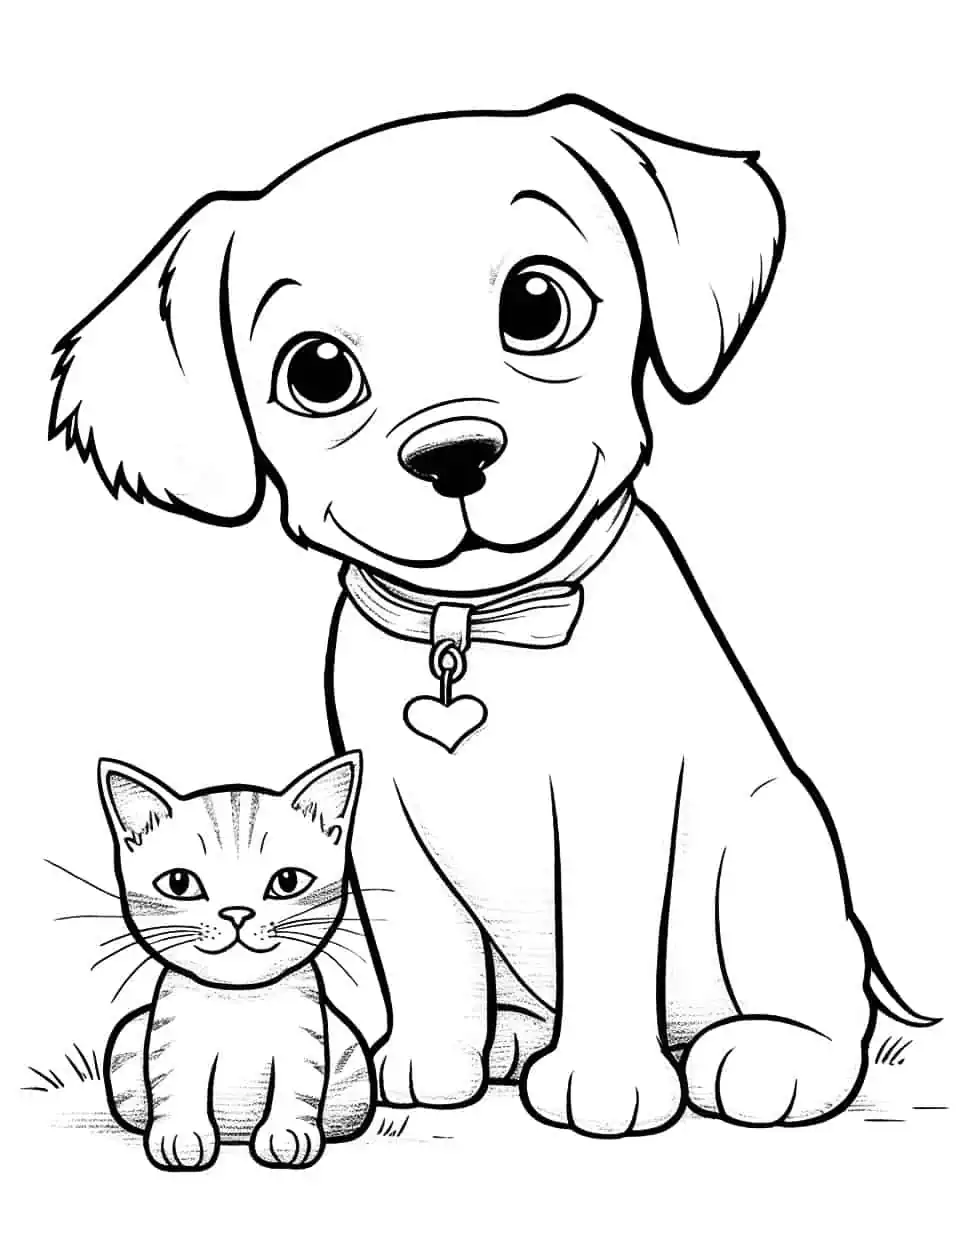 Animal Friends Dog Coloring Page - A puppy and a kitten becoming best friends.